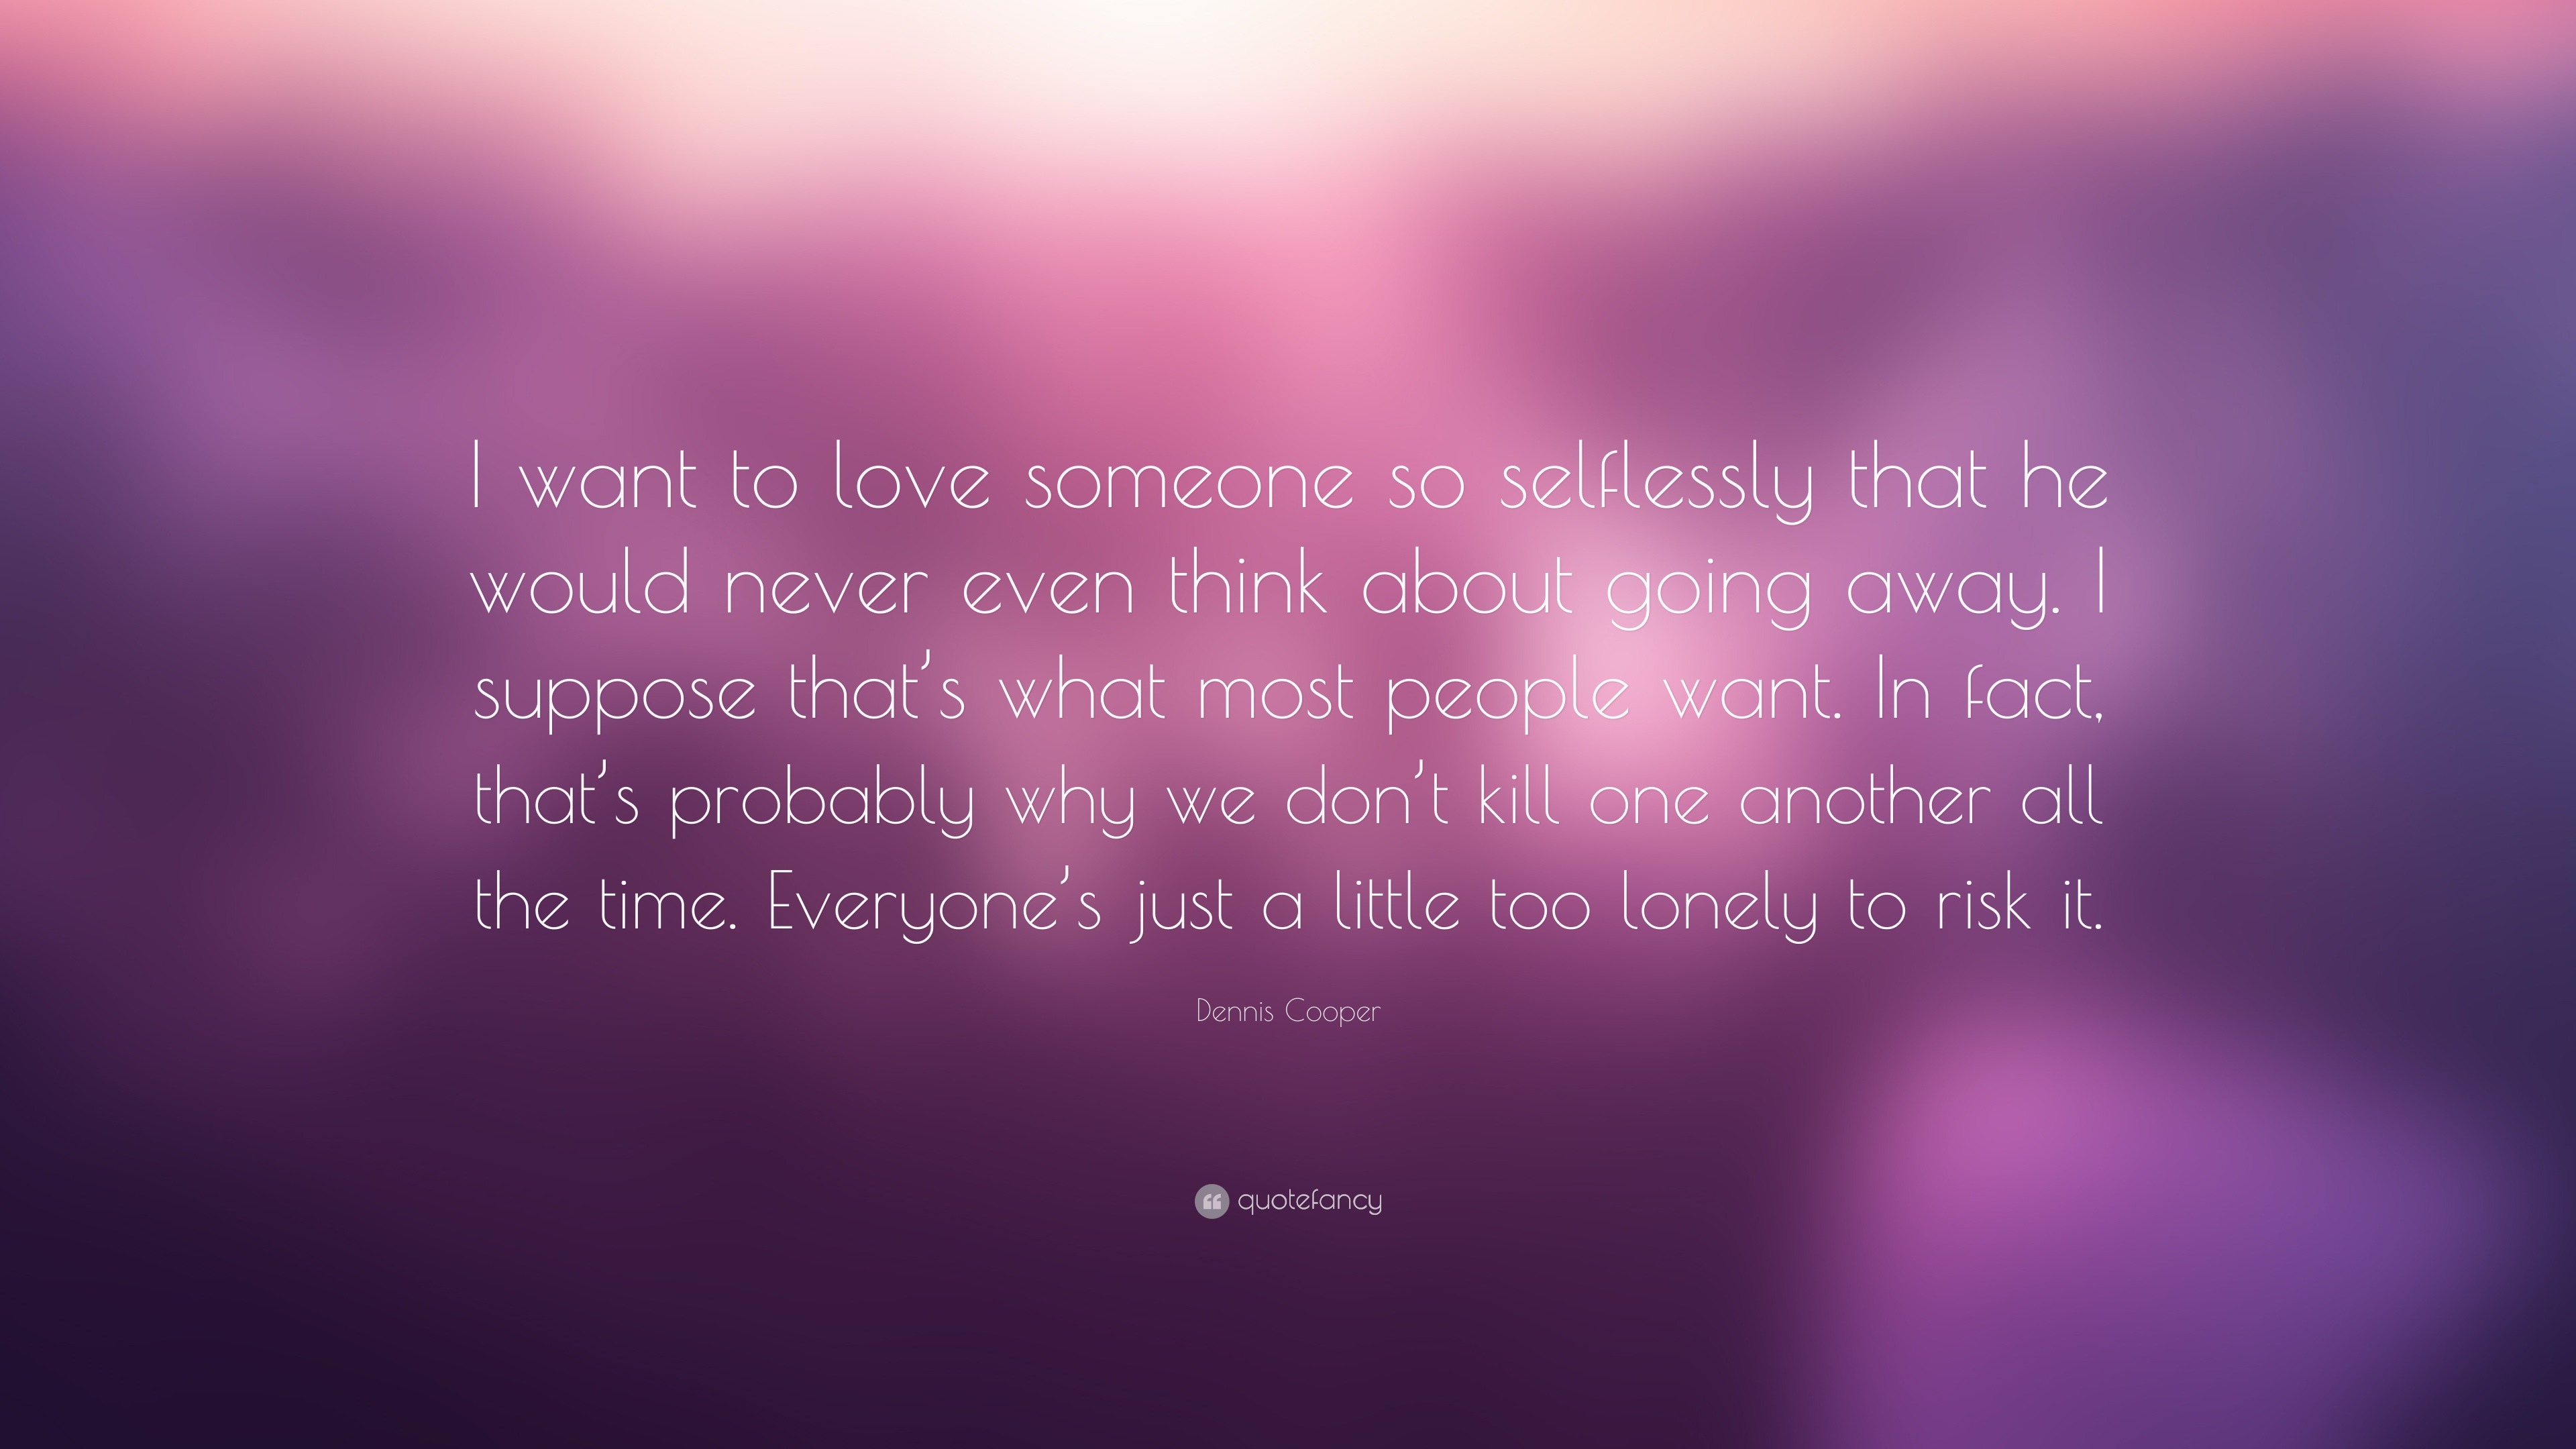 Dennis Cooper Quote “I want to love someone so selflessly that he would never